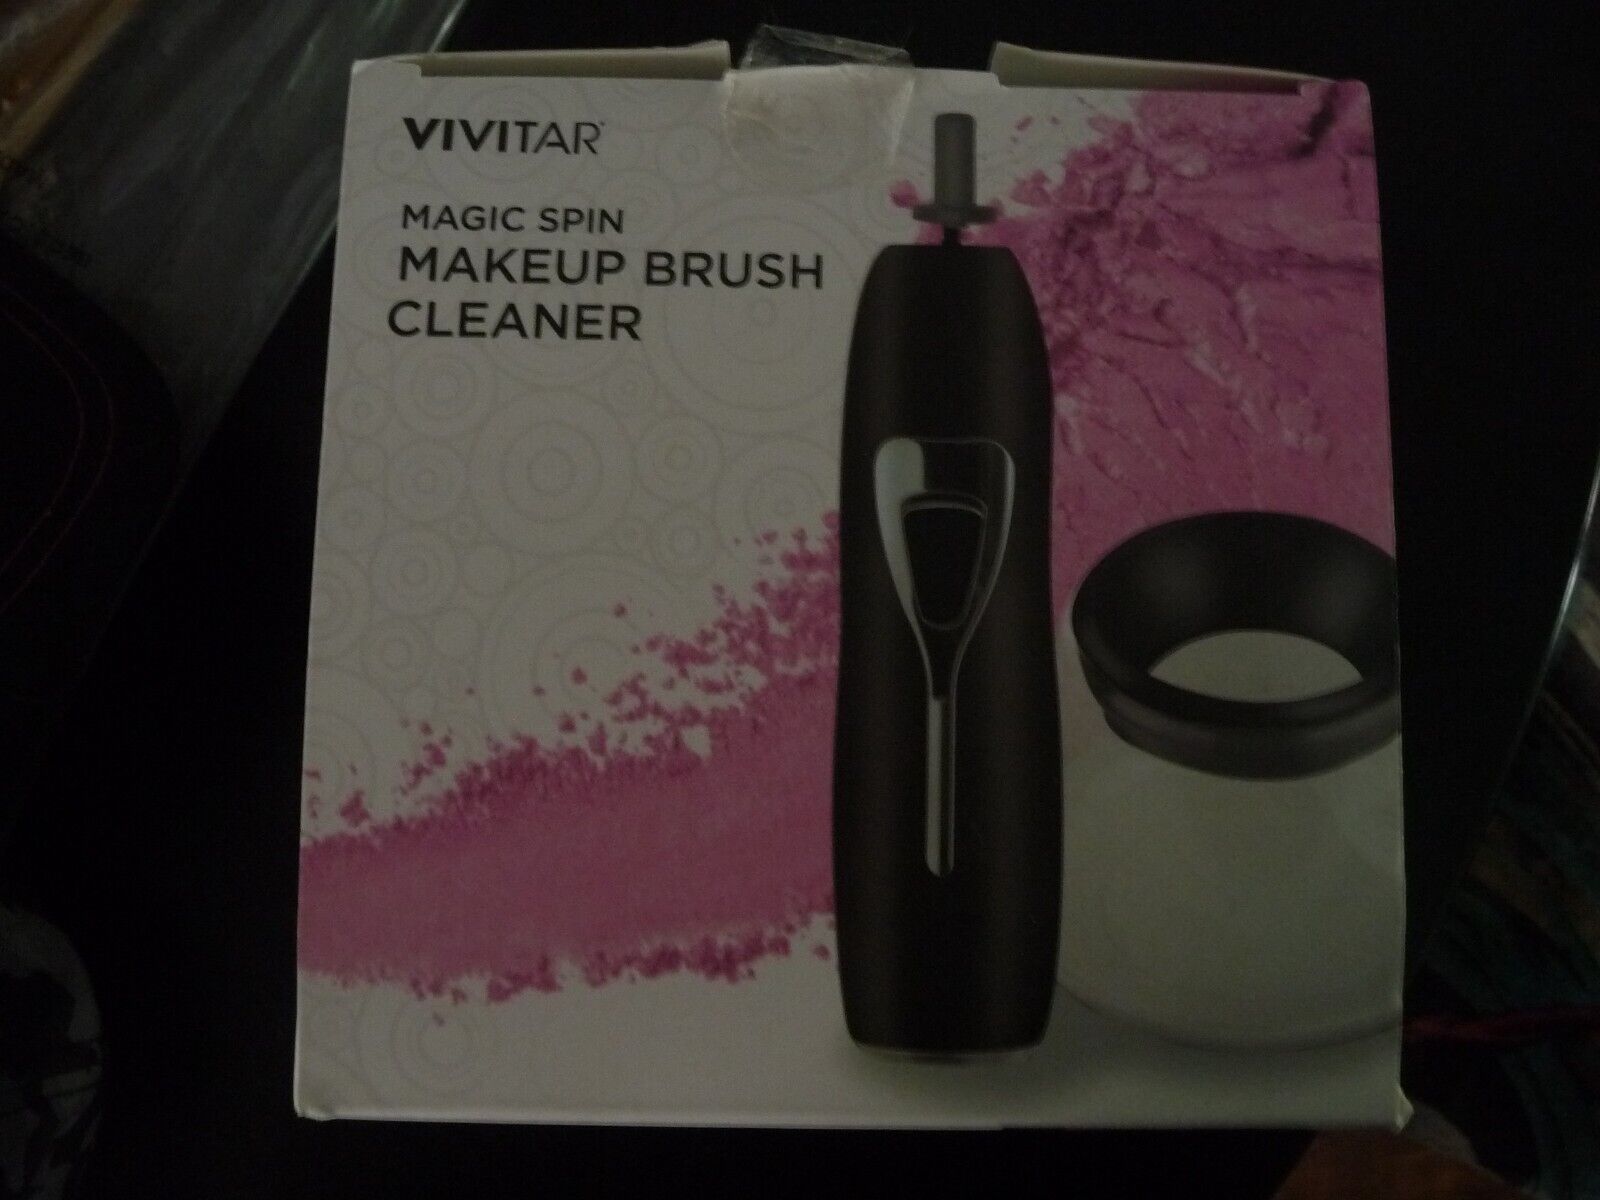 Vivitar Magic Spin Makeup Brush Cleaner Device - Portable Battery Cleaning